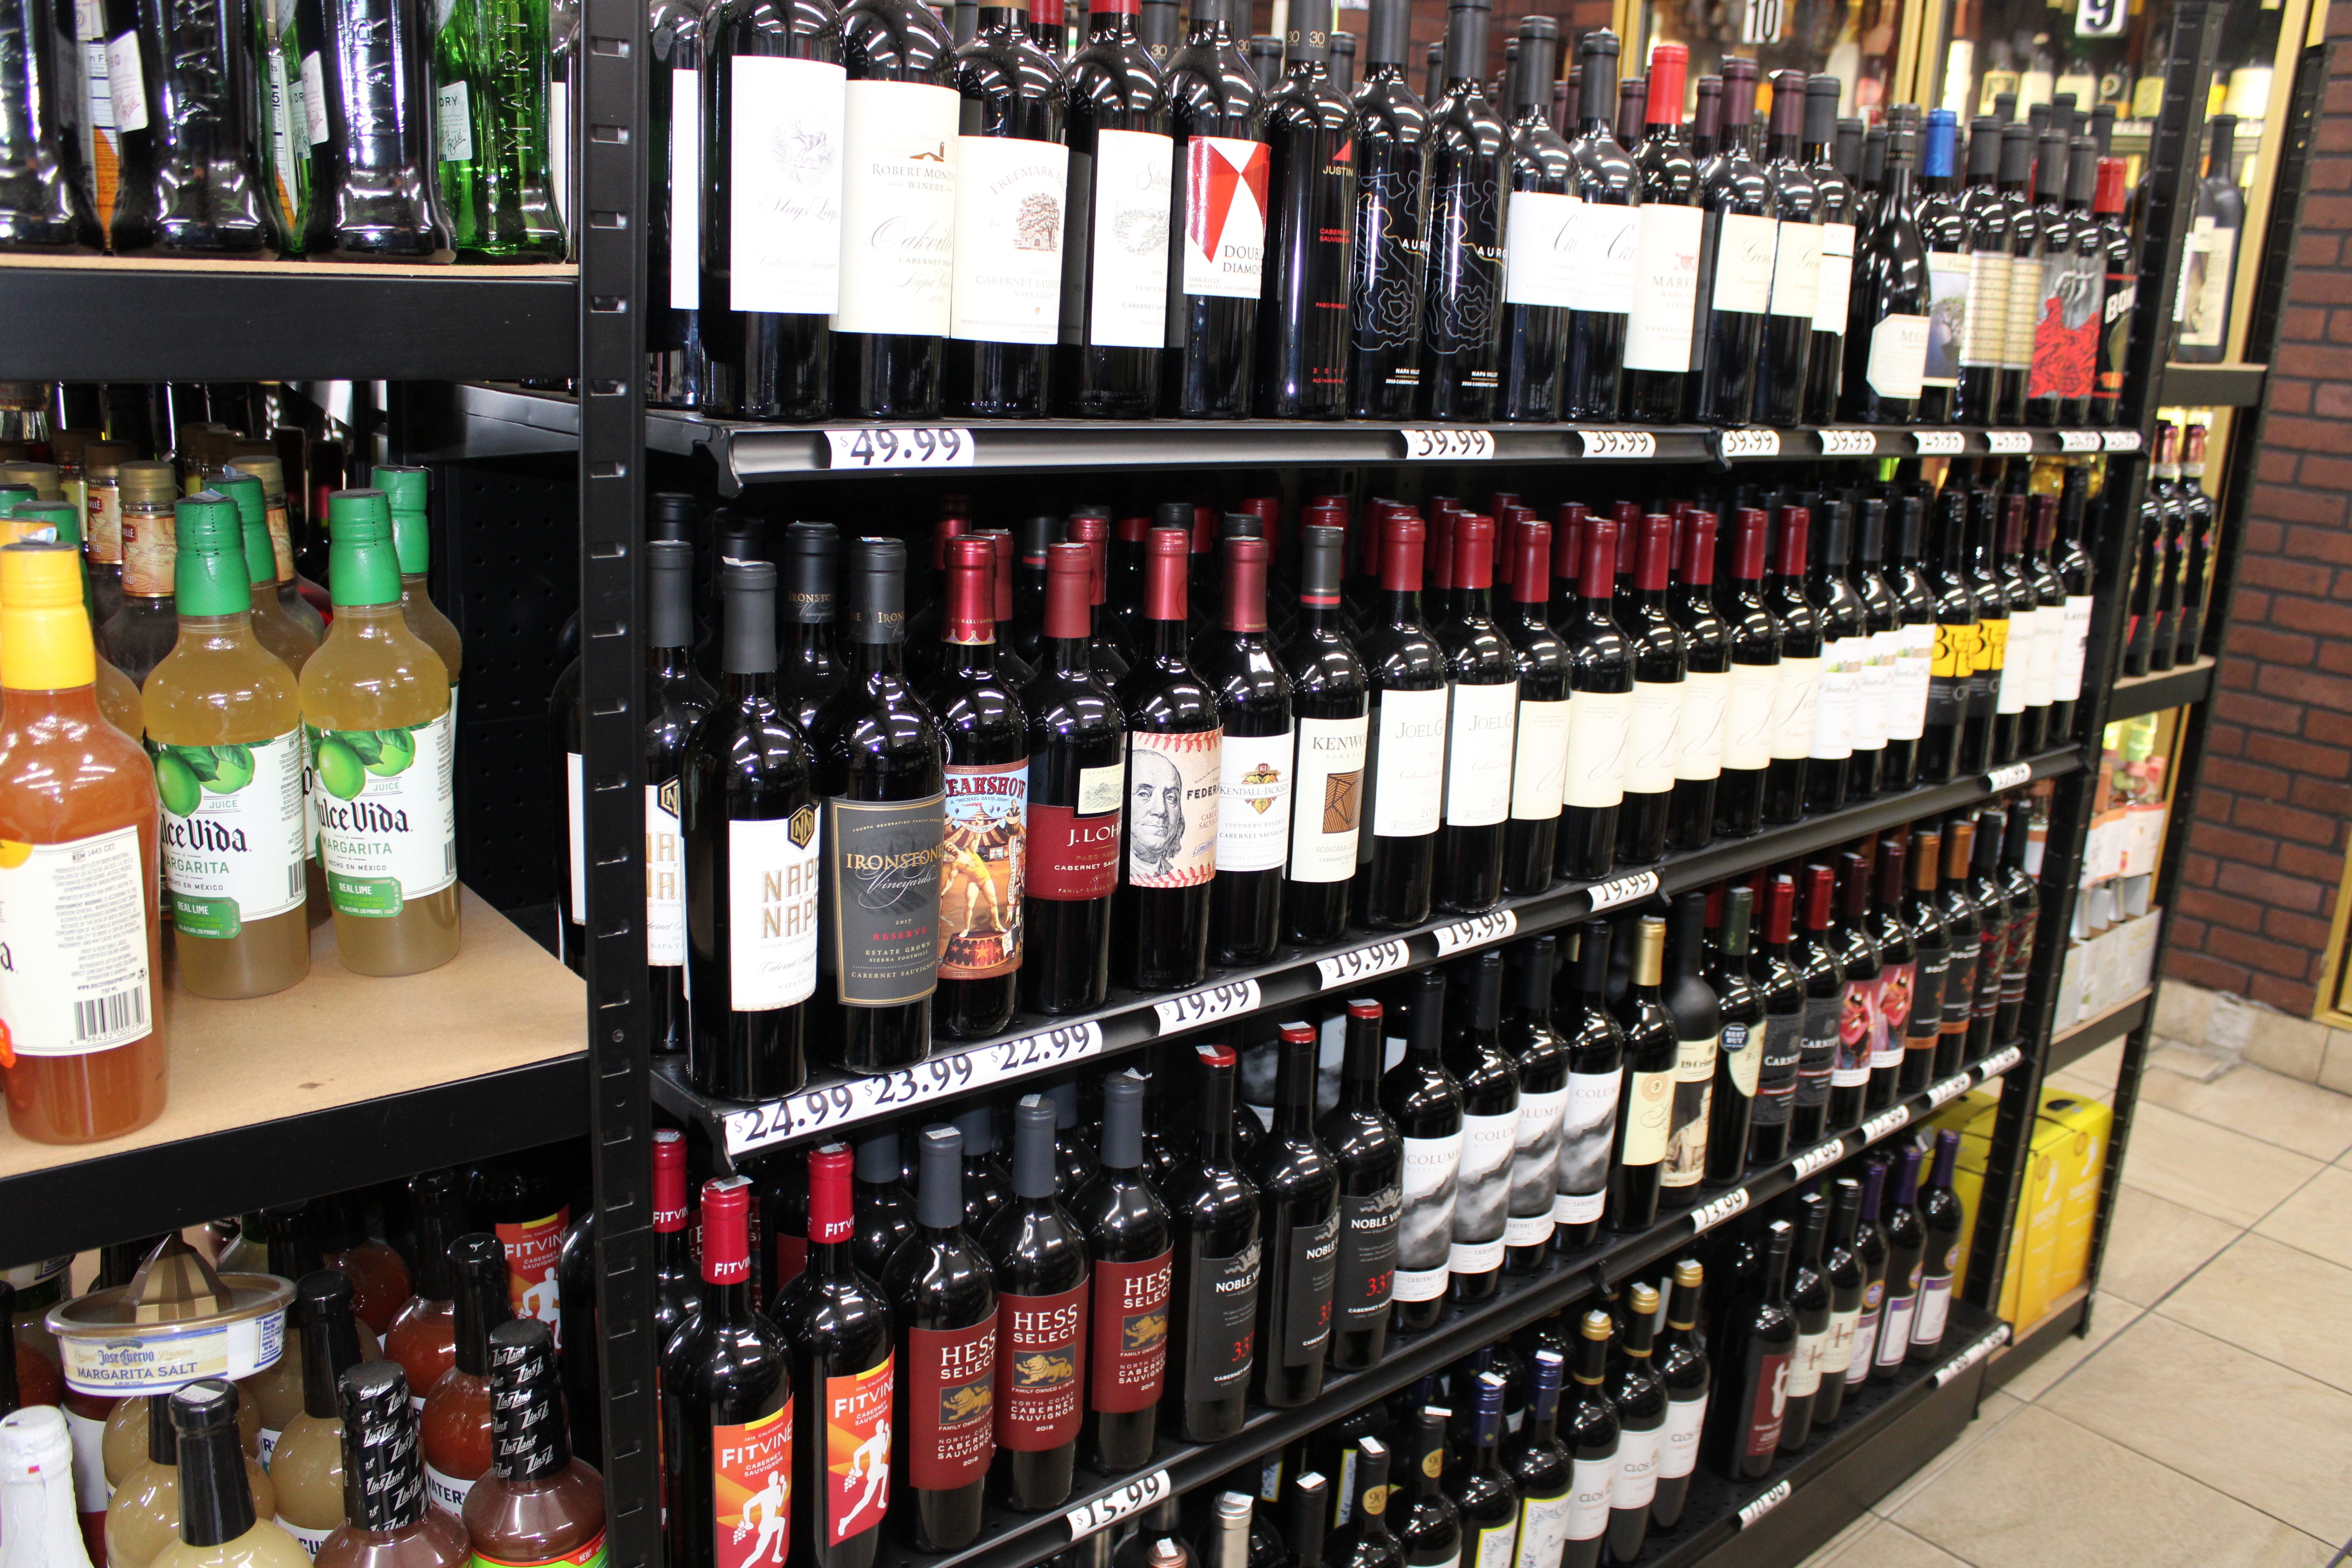 Happy Time Liquor has everything you need to gear up for a great night. Our liquor store in San Diego, CA, offers a wide selection of high-quality liquor, wine, spirits, beer, hard seltzers, and more! Pick up your favorite vodka, tequila, mezcal, rum, whisky, bourbon, or gin, plus any mixers, garnish, or soda you like.